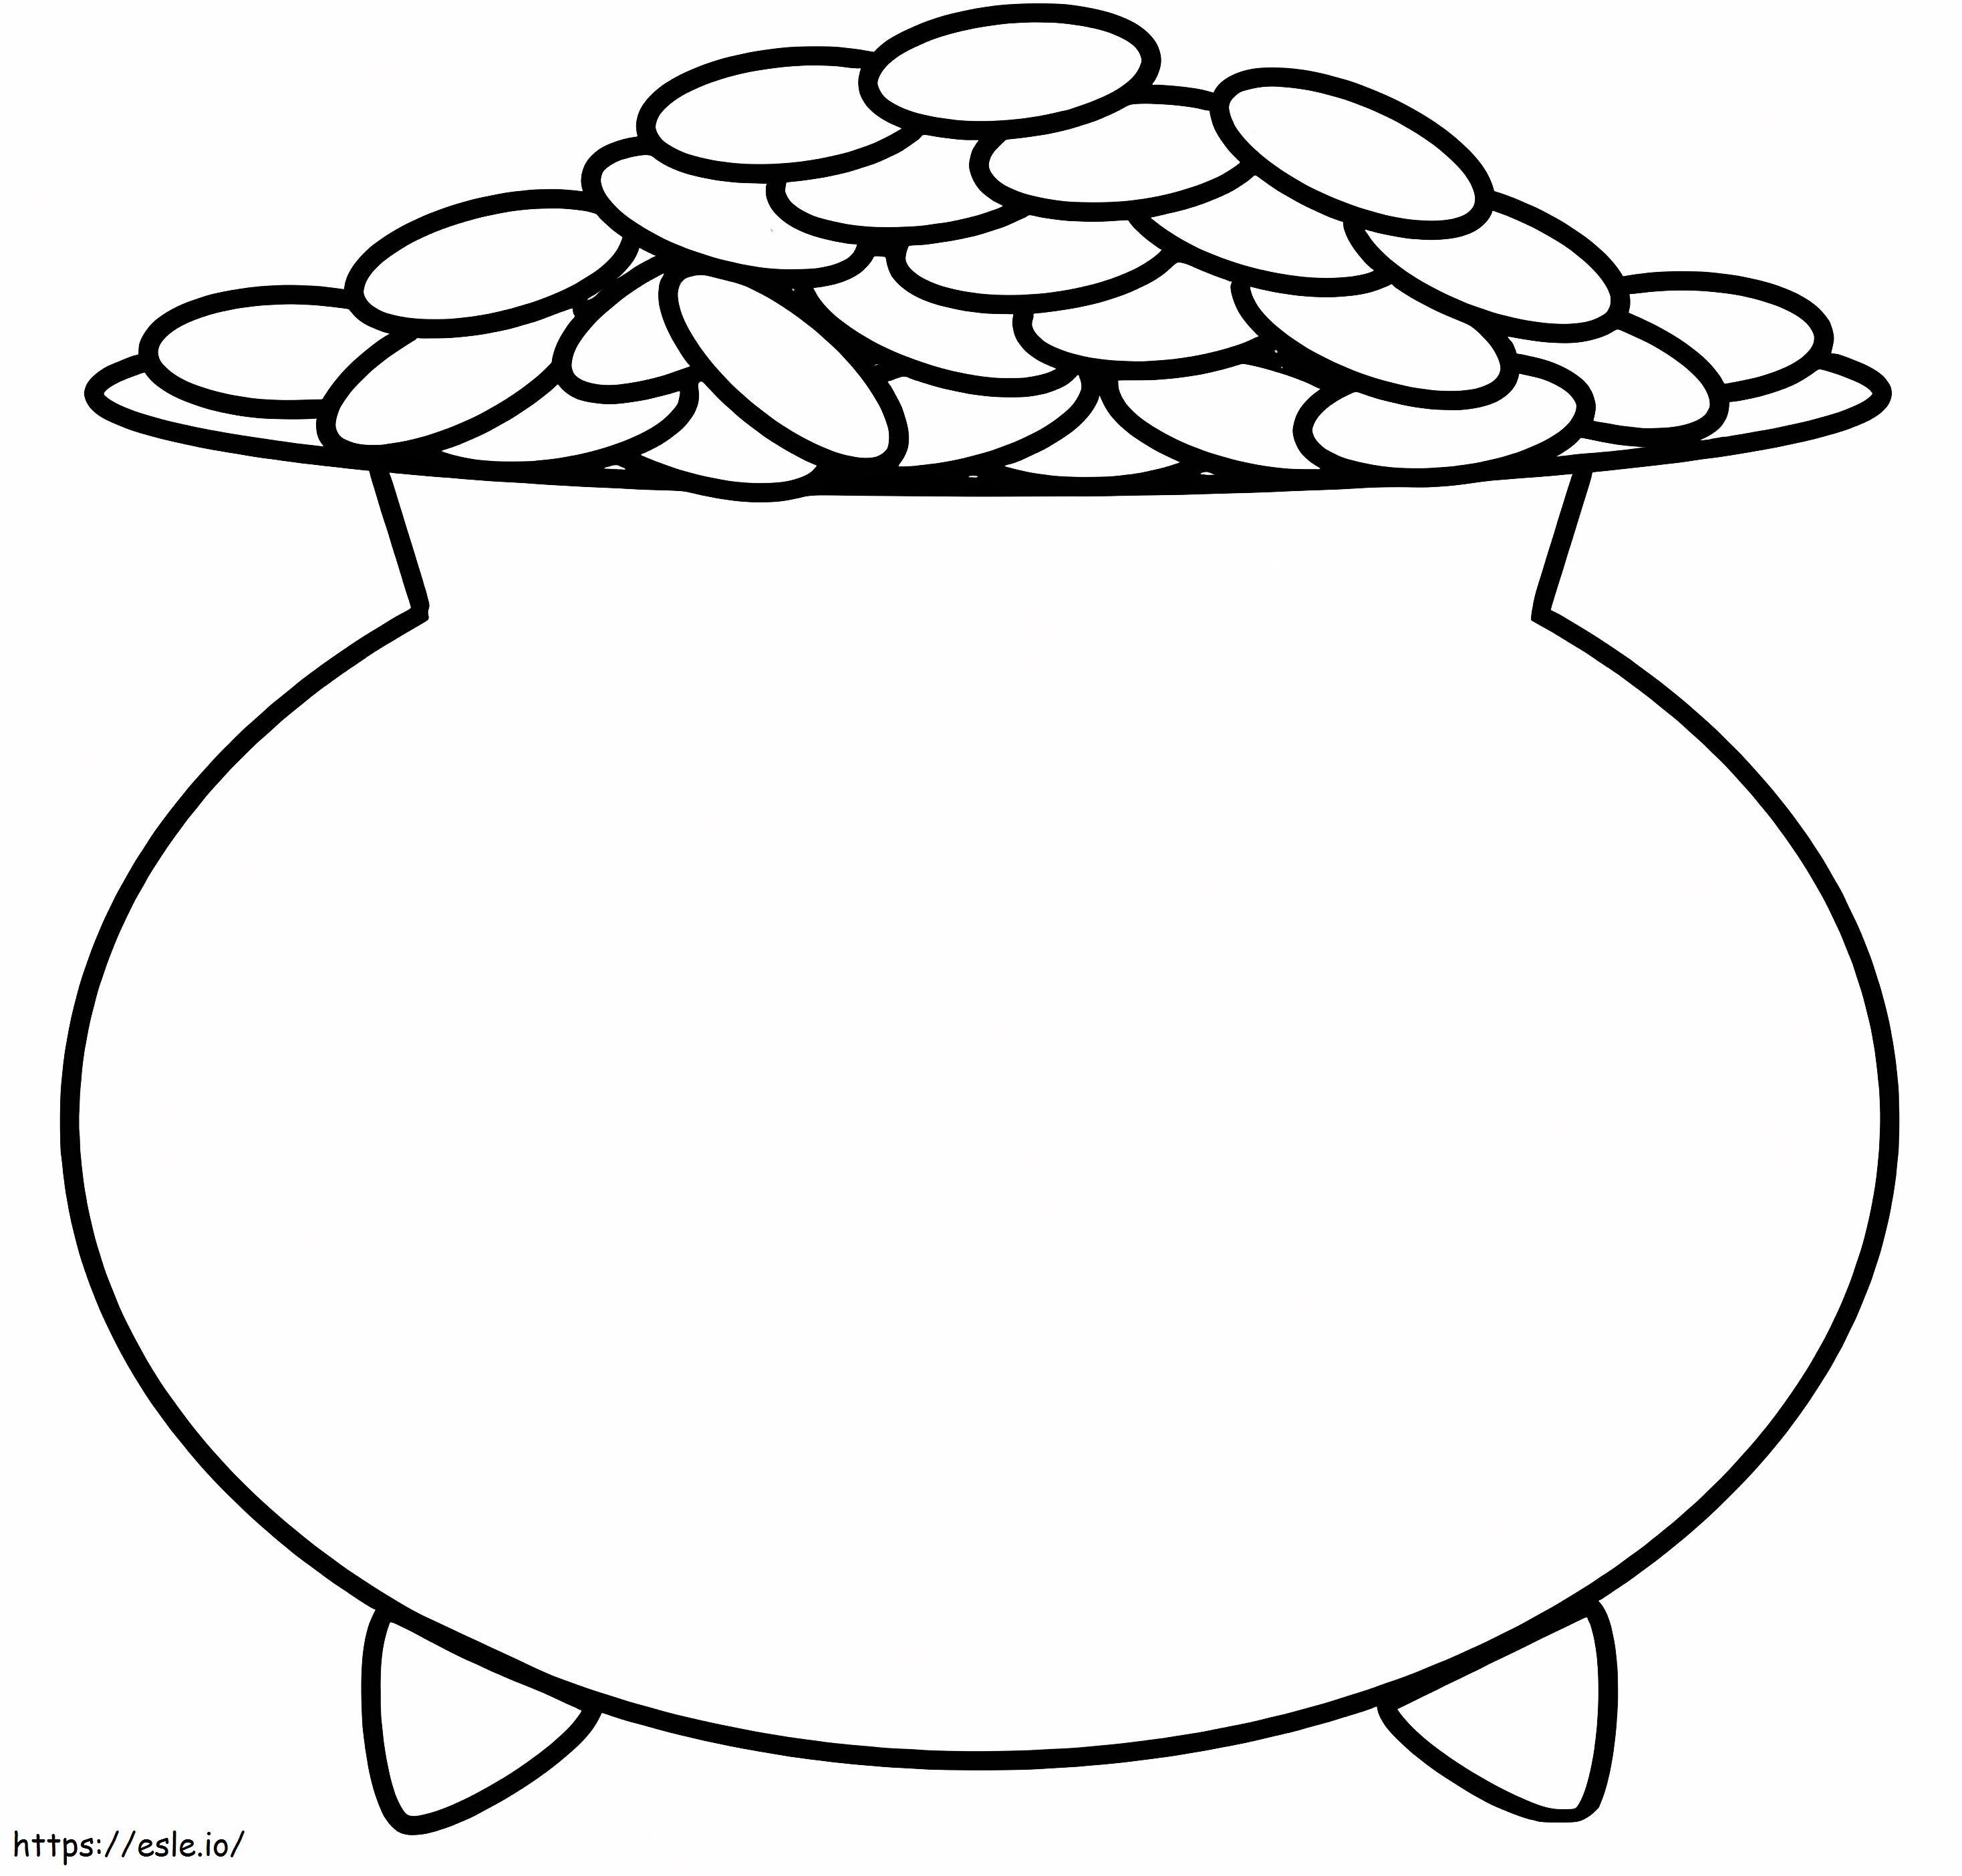 Pot Of Gold 10 coloring page